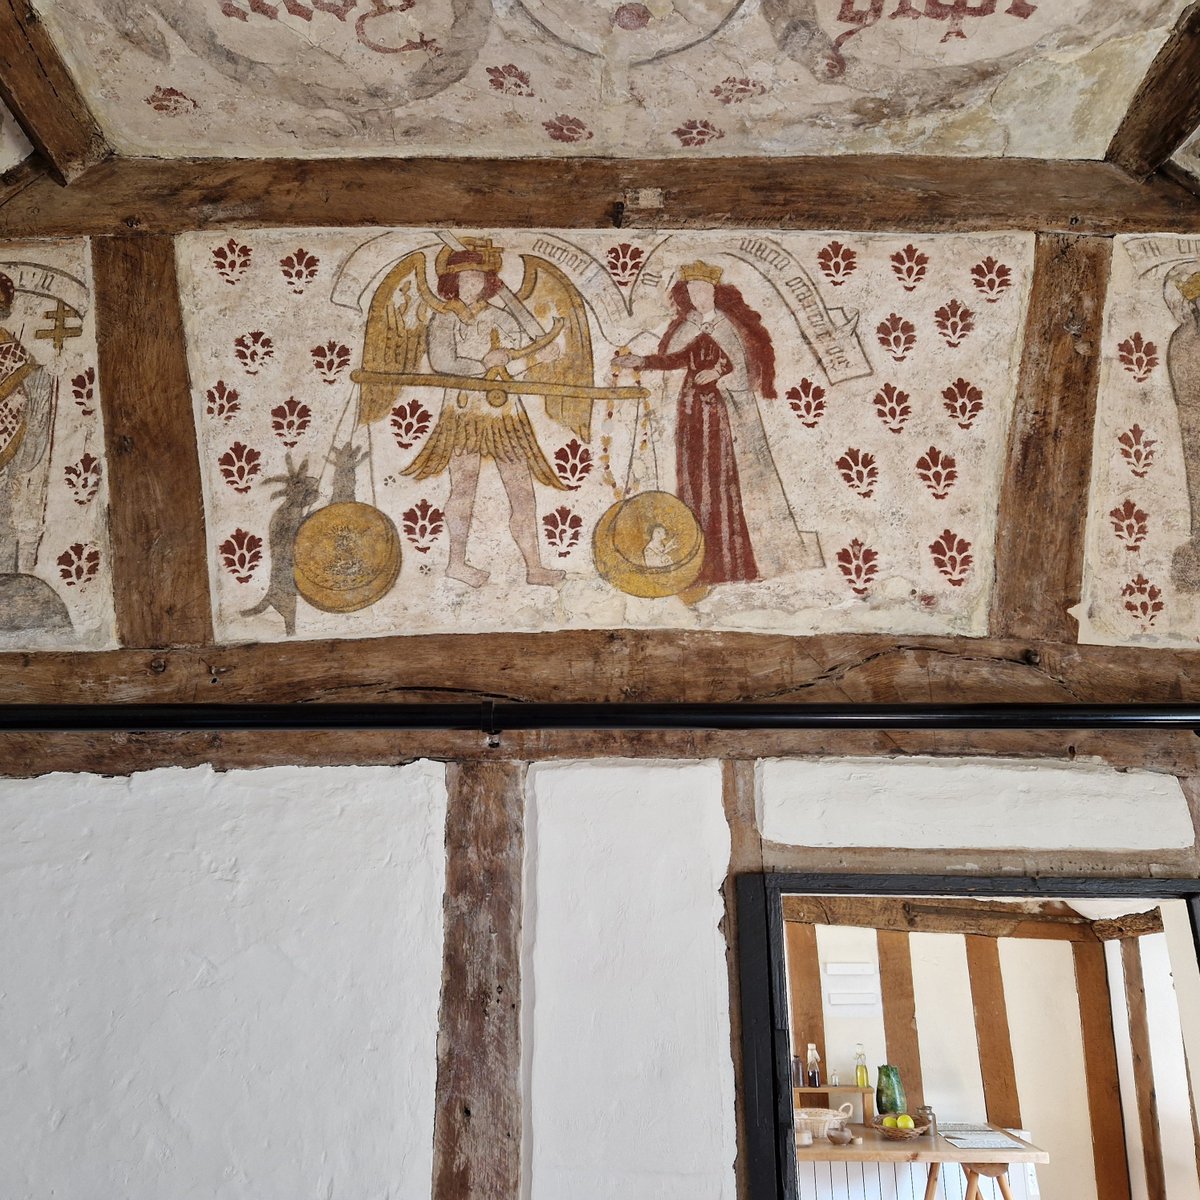 Late 15th century wall paintings at The Commandery, Worcester. Once a monastic hospital, this extraordinary building contains paintings which were covered at the Reformation. St Thomas Becket in his Martyrdom depicted as well as souls being weighed. 

#WallpaintingWednesday